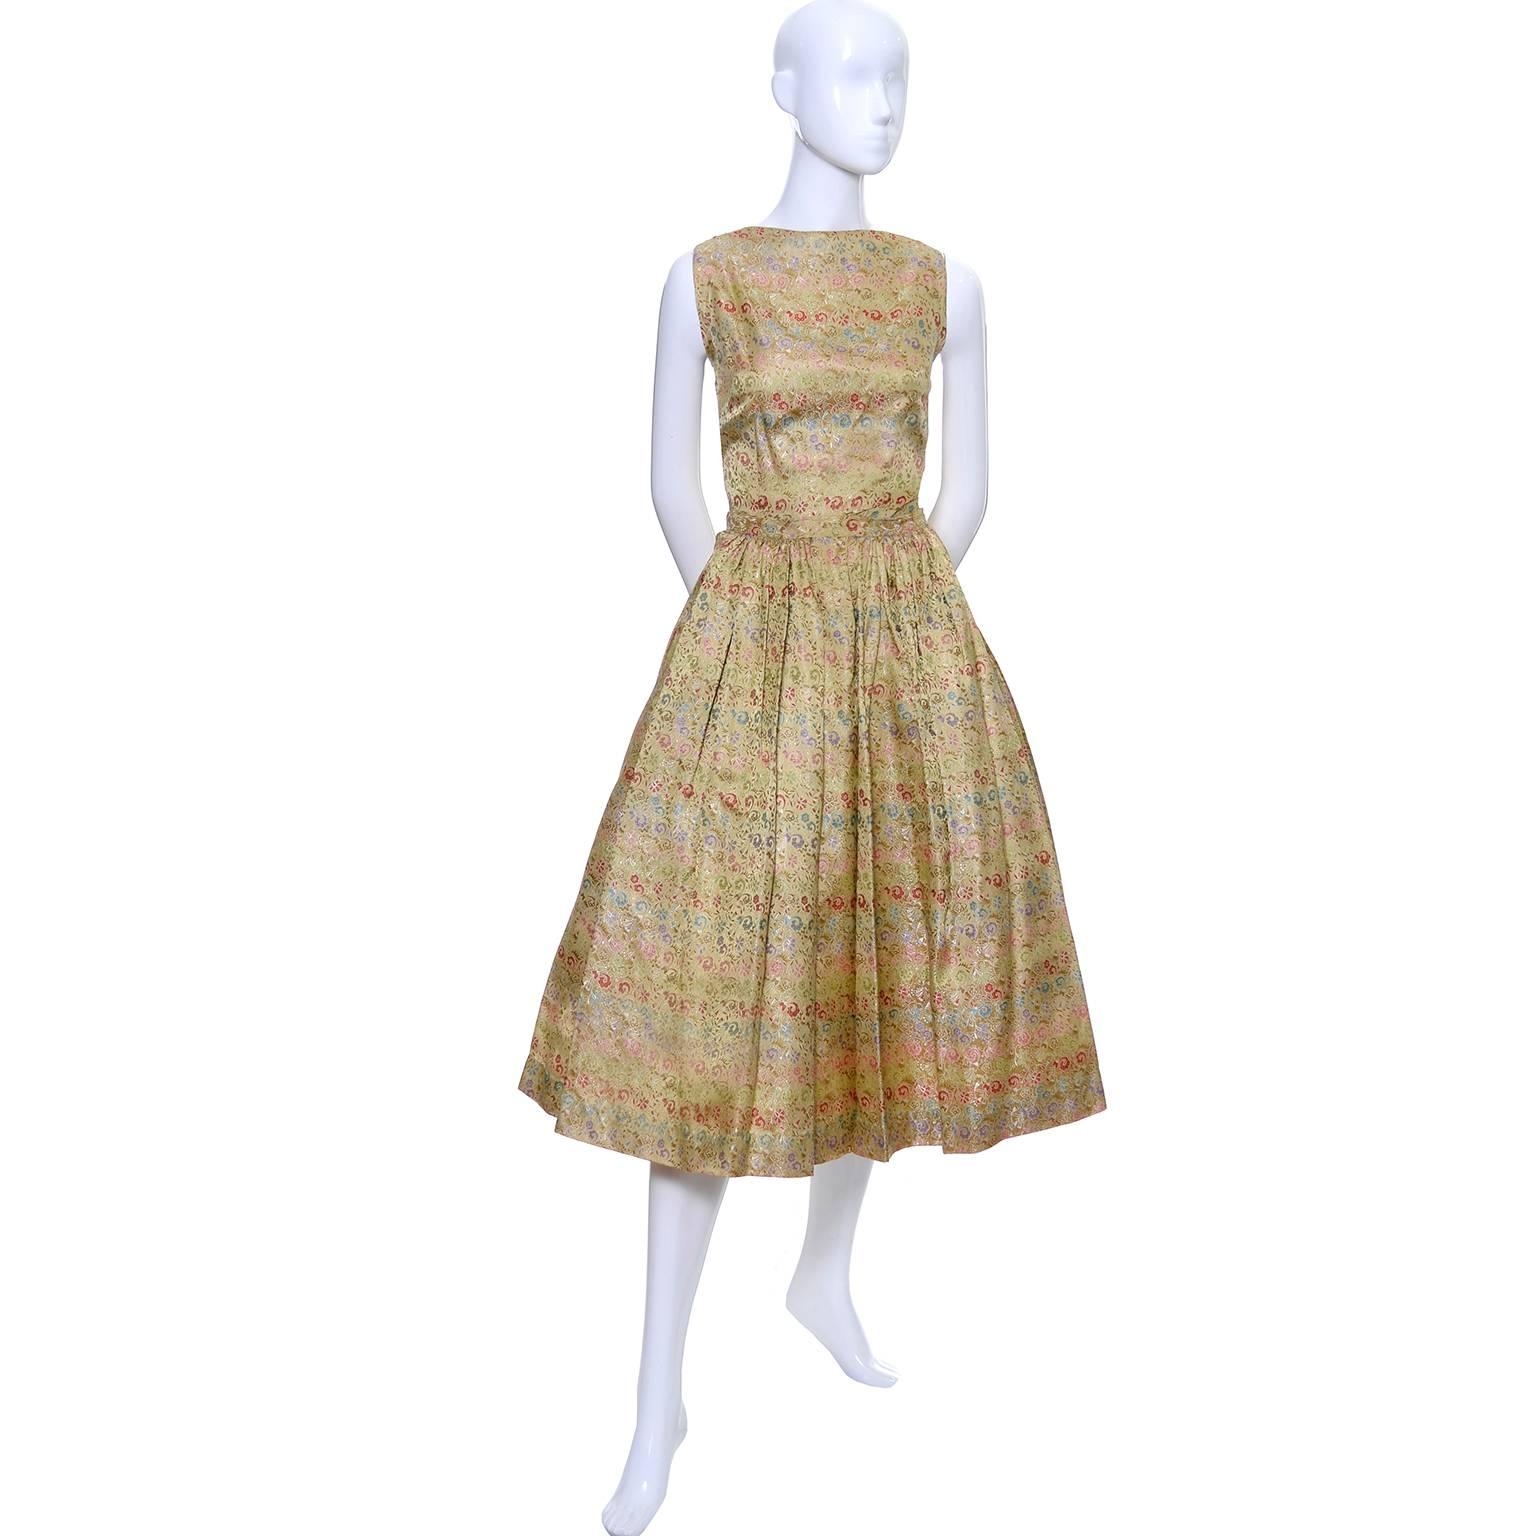 This is a rare, late 1950's early Nelly de Grab vintage brocade 2 piece gold dress with tiny multi colored flowers.  She was known for her more casual cotton prints and day dresses, but this is an early example of her more elegant designs. Press